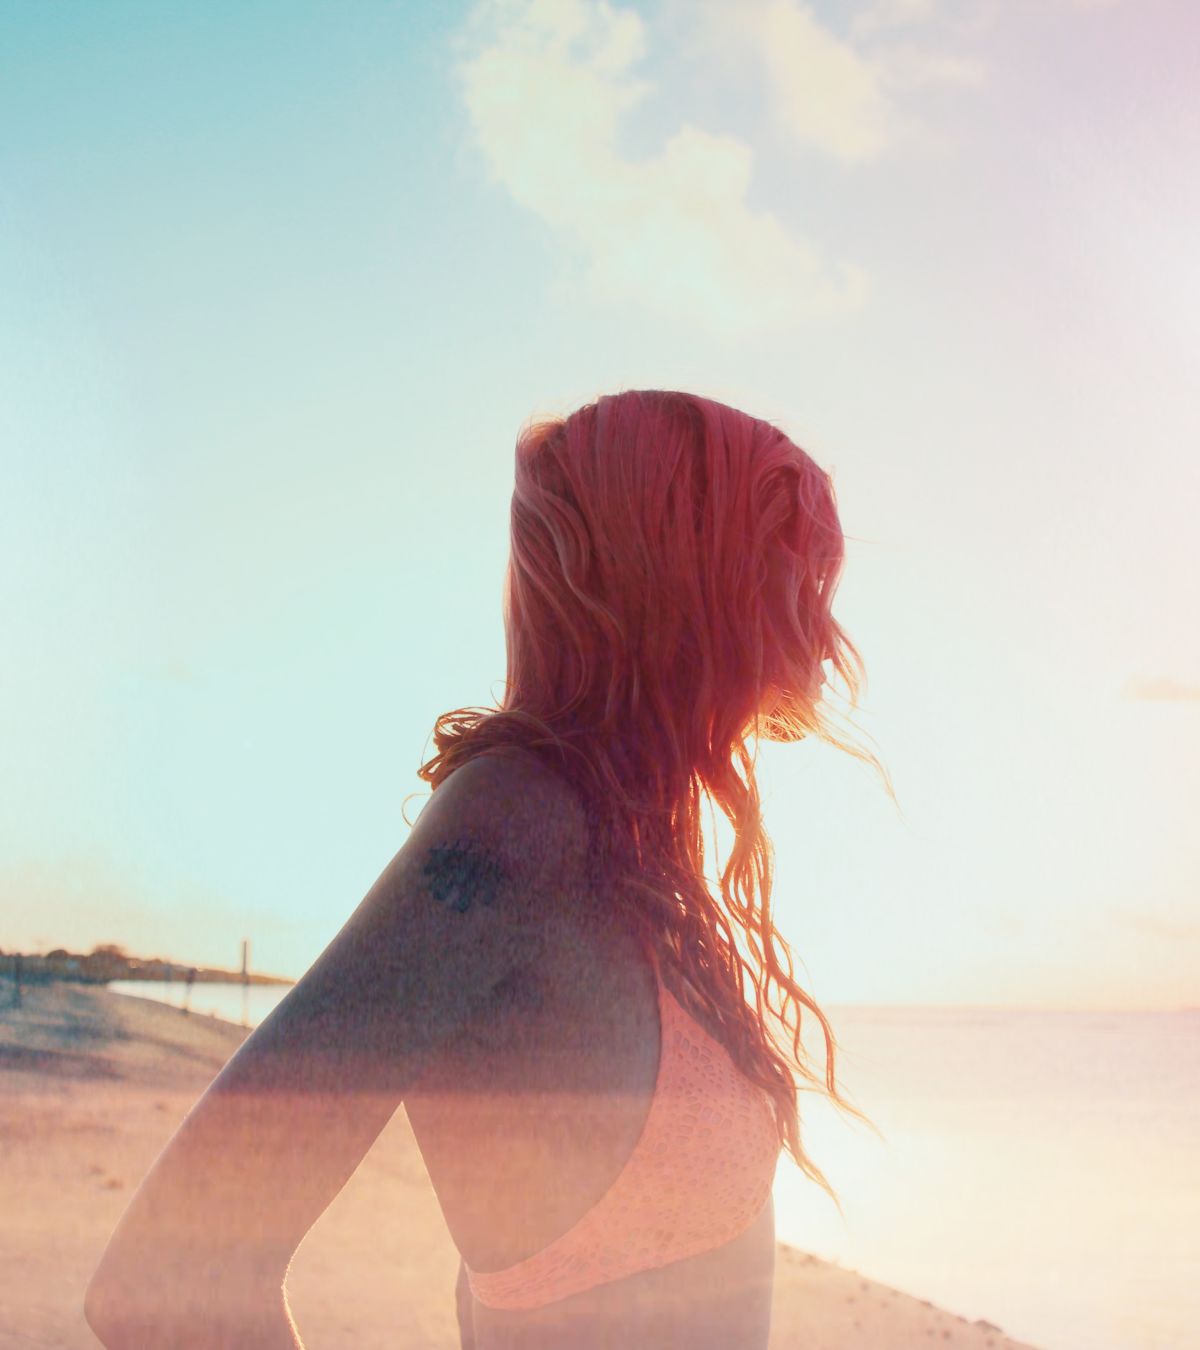 A Woman With Long Hair And A Sunset In The Background